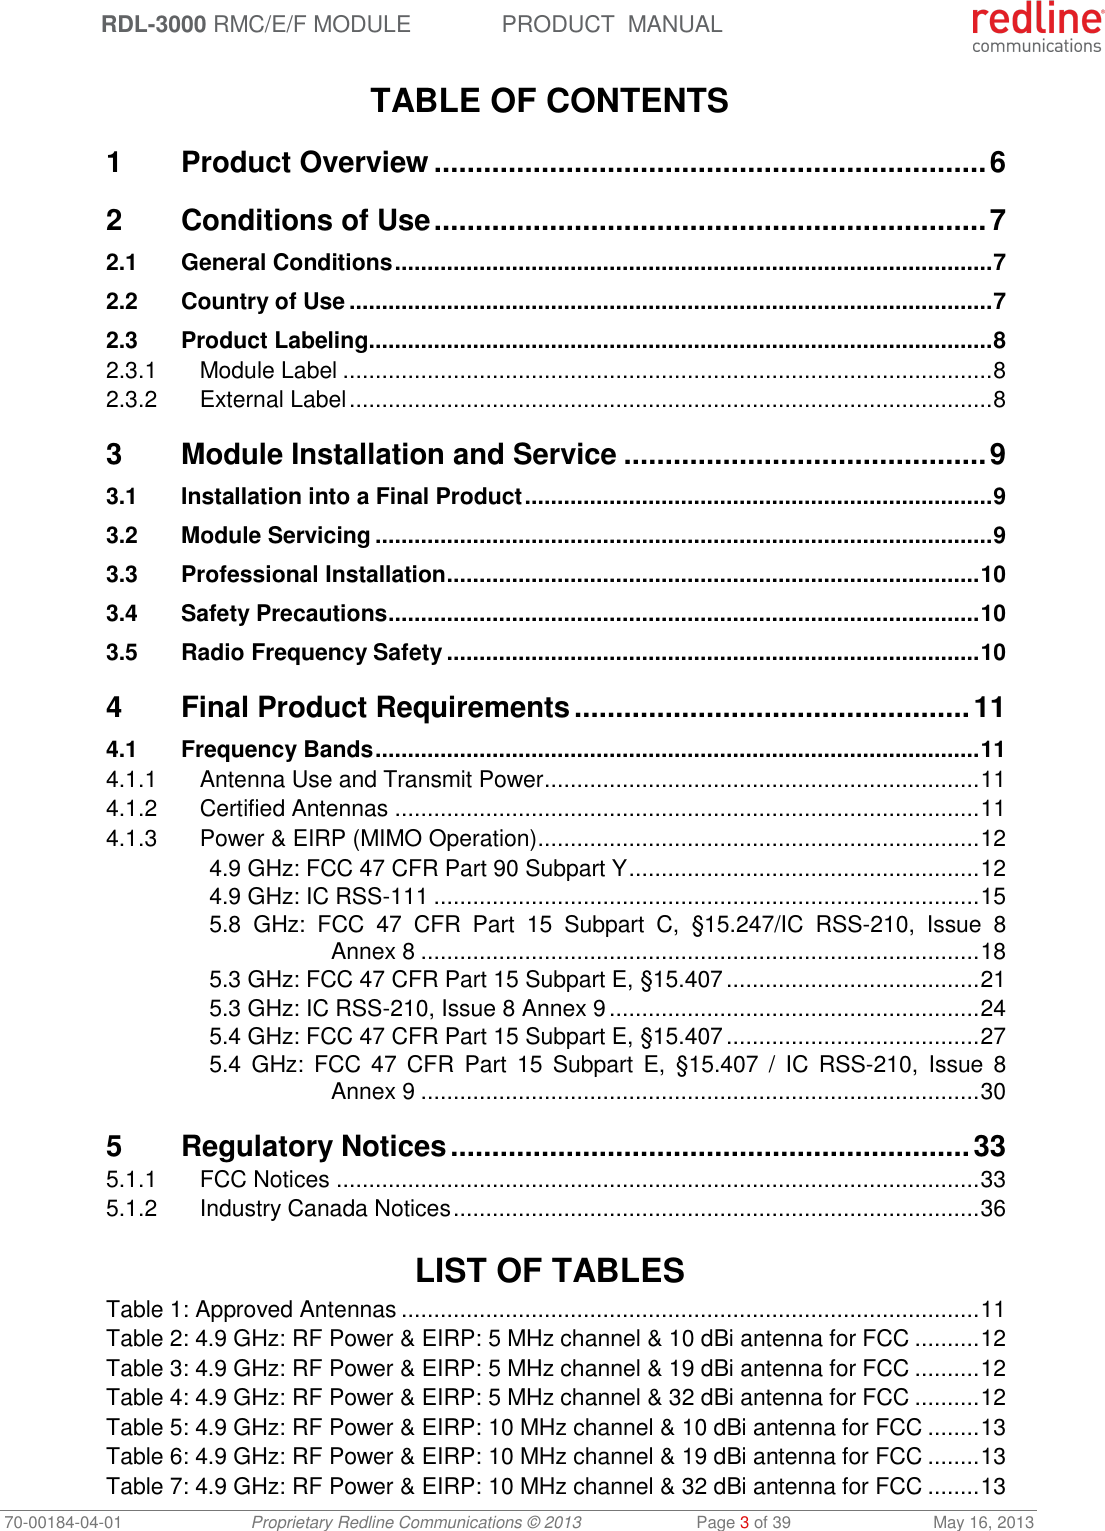  RDL-3000 RMC/E/F MODULE PRODUCT  MANUAL 70-00184-04-01 Proprietary Redline Communications © 2013  Page 3 of 39  May 16, 2013  TABLE OF CONTENTS 1 Product Overview ................................................................... 6 2 Conditions of Use ................................................................... 7 2.1 General Conditions ............................................................................................ 7 2.2 Country of Use ................................................................................................... 7 2.3 Product Labeling ................................................................................................ 8 2.3.1 Module Label .................................................................................................... 8 2.3.2 External Label ................................................................................................... 8 3 Module Installation and Service ............................................ 9 3.1 Installation into a Final Product ........................................................................ 9 3.2 Module Servicing ............................................................................................... 9 3.3 Professional Installation .................................................................................. 10 3.4 Safety Precautions ........................................................................................... 10 3.5 Radio Frequency Safety .................................................................................. 10 4 Final Product Requirements ................................................ 11 4.1 Frequency Bands ............................................................................................. 11 4.1.1 Antenna Use and Transmit Power ................................................................... 11 4.1.2 Certified Antennas .......................................................................................... 11 4.1.3 Power &amp; EIRP (MIMO Operation) .................................................................... 12 4.9 GHz: FCC 47 CFR Part 90 Subpart Y ...................................................... 12 4.9 GHz: IC RSS-111 .................................................................................... 15 5.8  GHz:  FCC  47  CFR  Part  15  Subpart  C,  §15.247/IC  RSS-210,  Issue  8 Annex 8 ...................................................................................... 18 5.3 GHz: FCC 47 CFR Part 15 Subpart E, §15.407 ....................................... 21 5.3 GHz: IC RSS-210, Issue 8 Annex 9 ......................................................... 24 5.4 GHz: FCC 47 CFR Part 15 Subpart E, §15.407 ....................................... 27 5.4  GHz:  FCC 47 CFR  Part  15  Subpart  E,  §15.407 / IC RSS-210,  Issue 8 Annex 9 ...................................................................................... 30 5 Regulatory Notices ............................................................... 33 5.1.1 FCC Notices ................................................................................................... 33 5.1.2 Industry Canada Notices ................................................................................. 36   LIST OF TABLES Table 1: Approved Antennas ......................................................................................... 11 Table 2: 4.9 GHz: RF Power &amp; EIRP: 5 MHz channel &amp; 10 dBi antenna for FCC .......... 12 Table 3: 4.9 GHz: RF Power &amp; EIRP: 5 MHz channel &amp; 19 dBi antenna for FCC .......... 12 Table 4: 4.9 GHz: RF Power &amp; EIRP: 5 MHz channel &amp; 32 dBi antenna for FCC .......... 12 Table 5: 4.9 GHz: RF Power &amp; EIRP: 10 MHz channel &amp; 10 dBi antenna for FCC ........ 13 Table 6: 4.9 GHz: RF Power &amp; EIRP: 10 MHz channel &amp; 19 dBi antenna for FCC ........ 13 Table 7: 4.9 GHz: RF Power &amp; EIRP: 10 MHz channel &amp; 32 dBi antenna for FCC ........ 13 